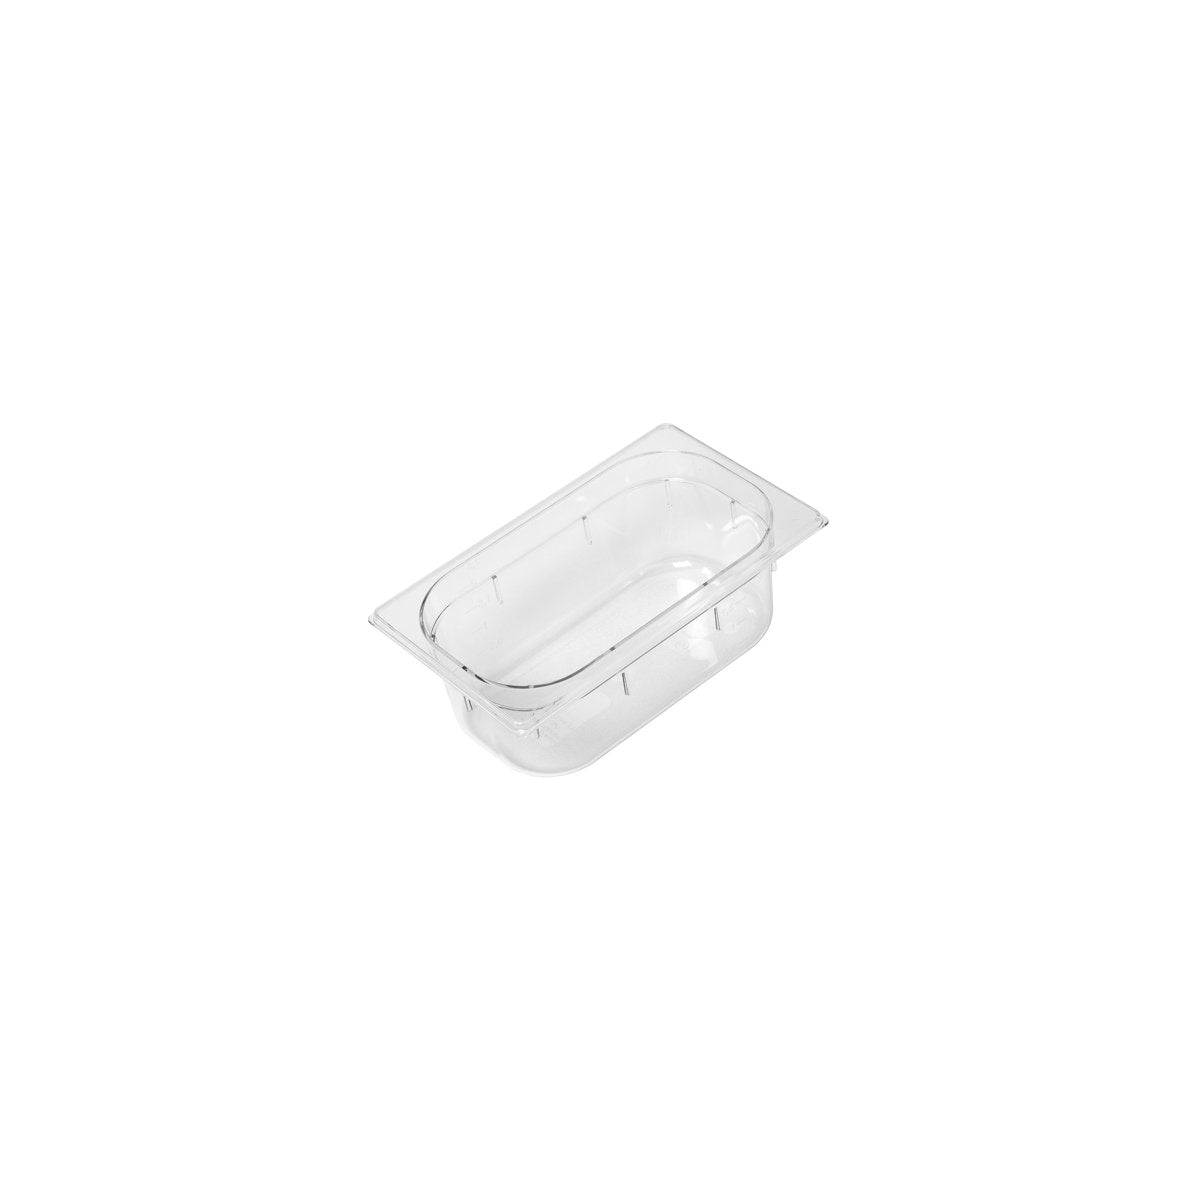 PC-14150CL Inox Macel Gastronorm Pan Polycarbonate Clear 1/4 Size 150mm Tomkin Australia Hospitality Supplies